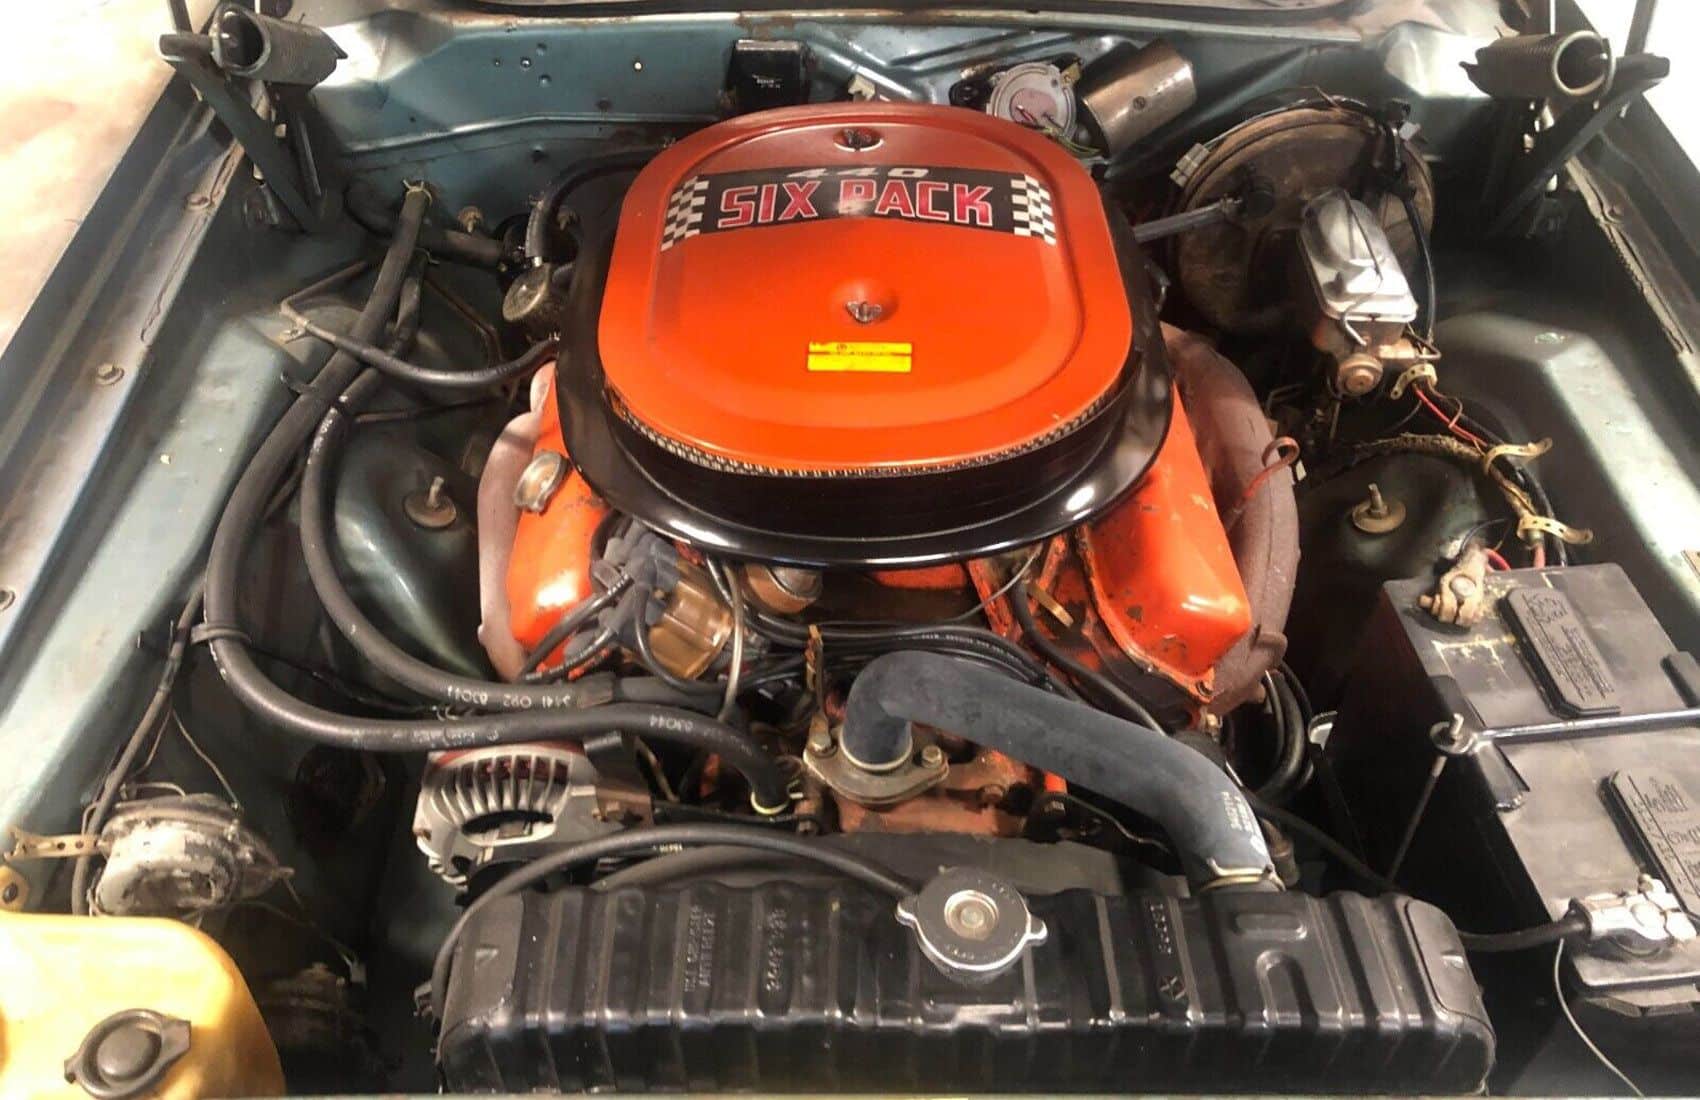 Under-The-Hood-Of-The-1971-Dodge-Super-Bee-440-Six-Pack